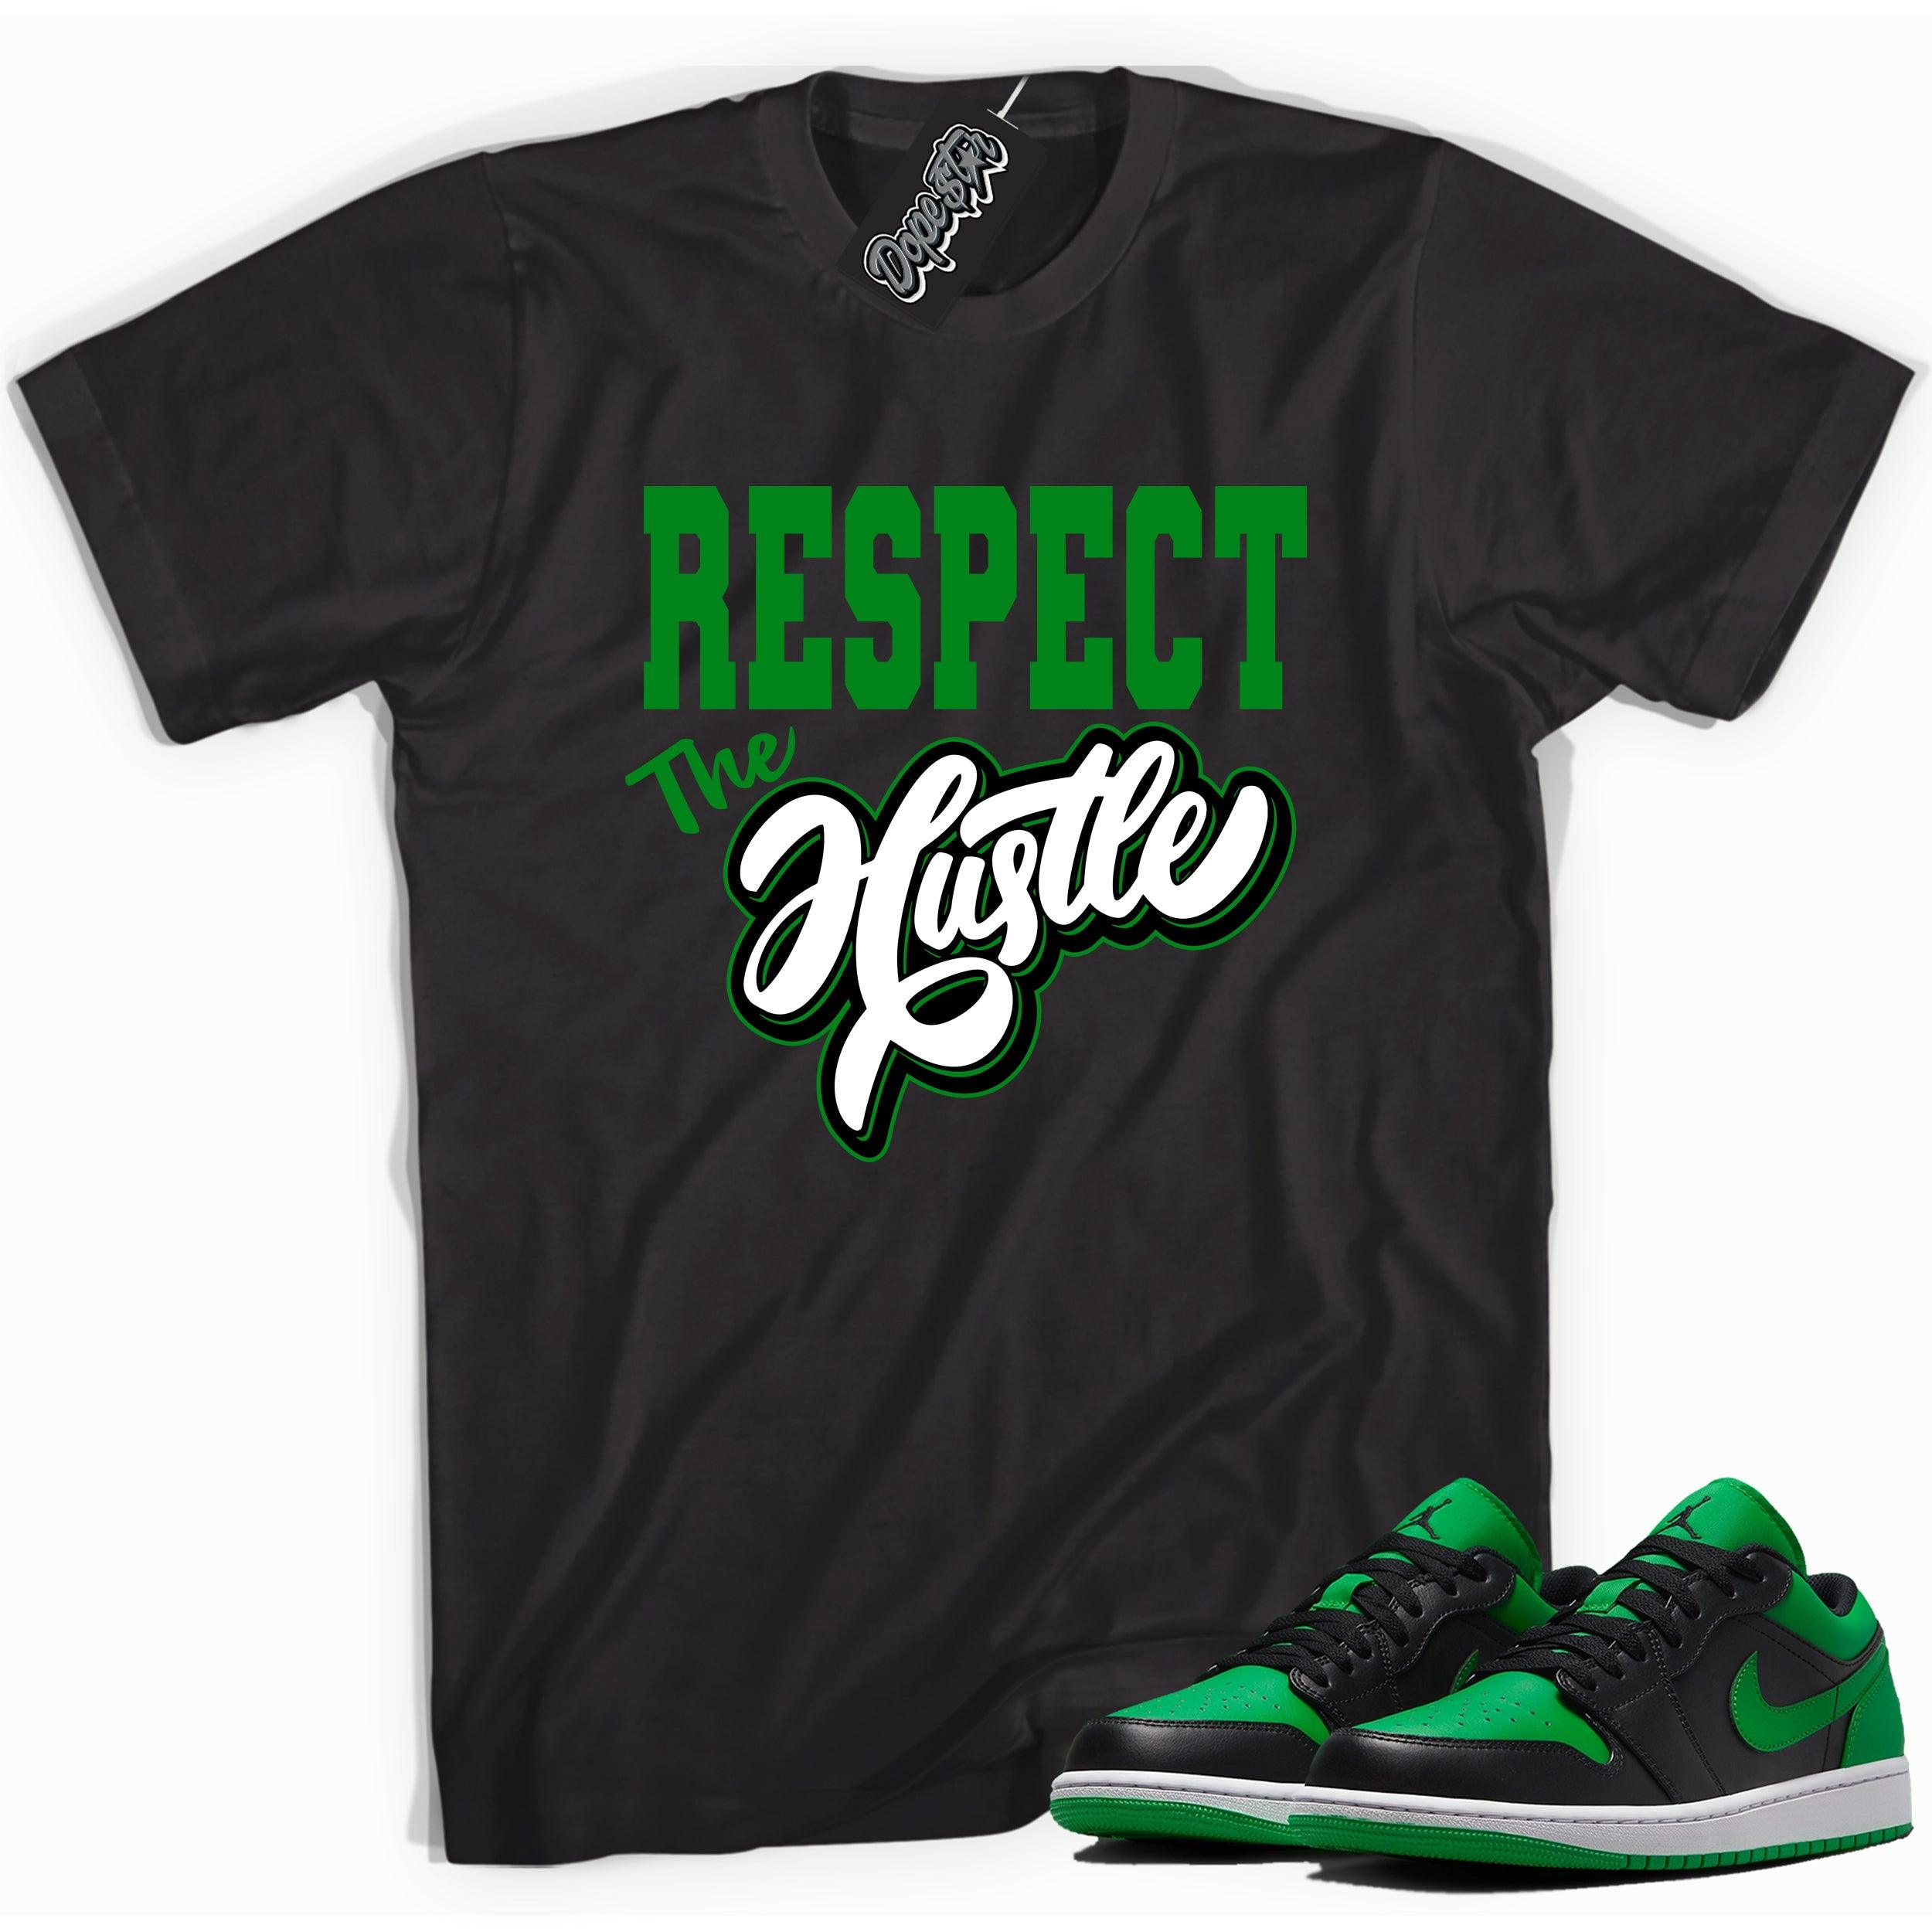 Cool black graphic tee with 'respect the hustle' print, that perfectly matches Air Jordan 1 Low Lucky Green sneakers